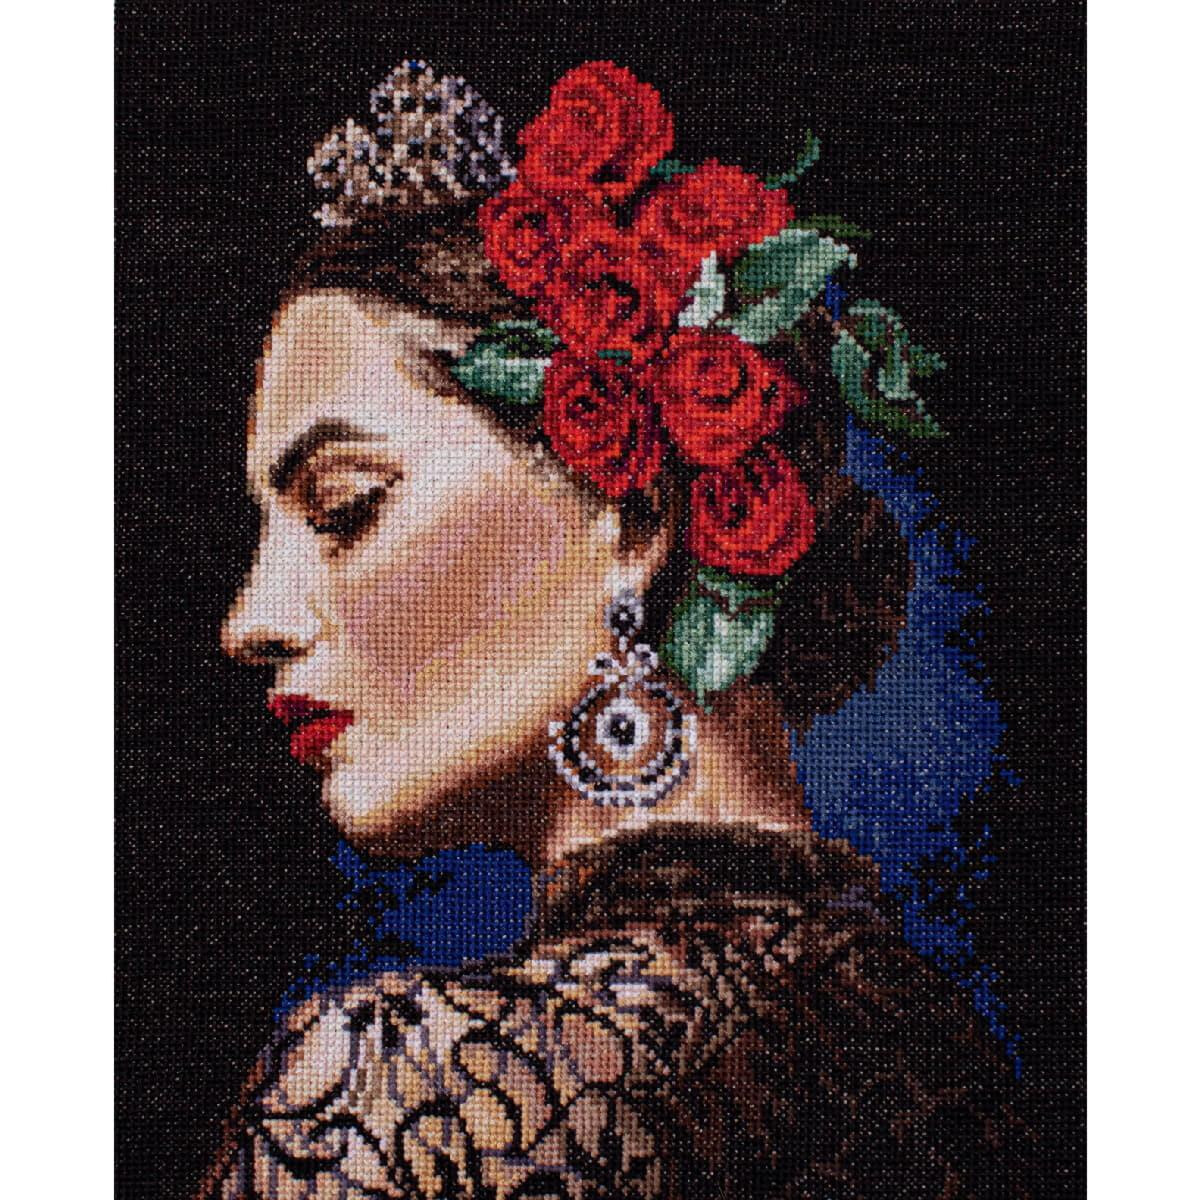 Letistitch counted cross stitch kit "Muse",...